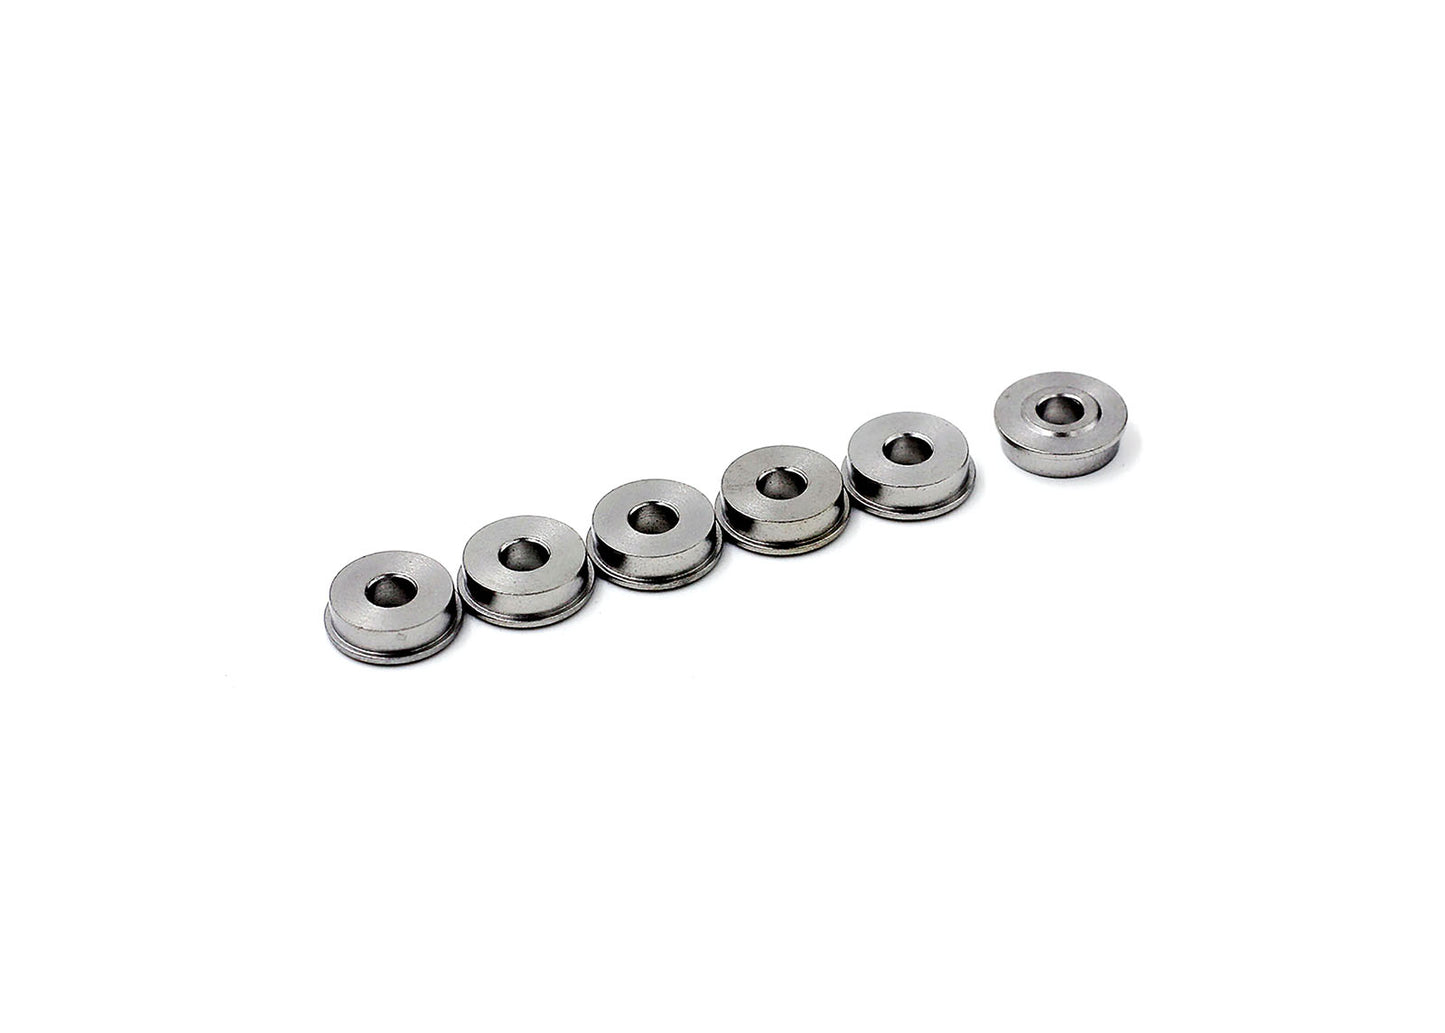 Modify Tempered Stainless Bushings 8mm (6pcs) - AH Tactical 